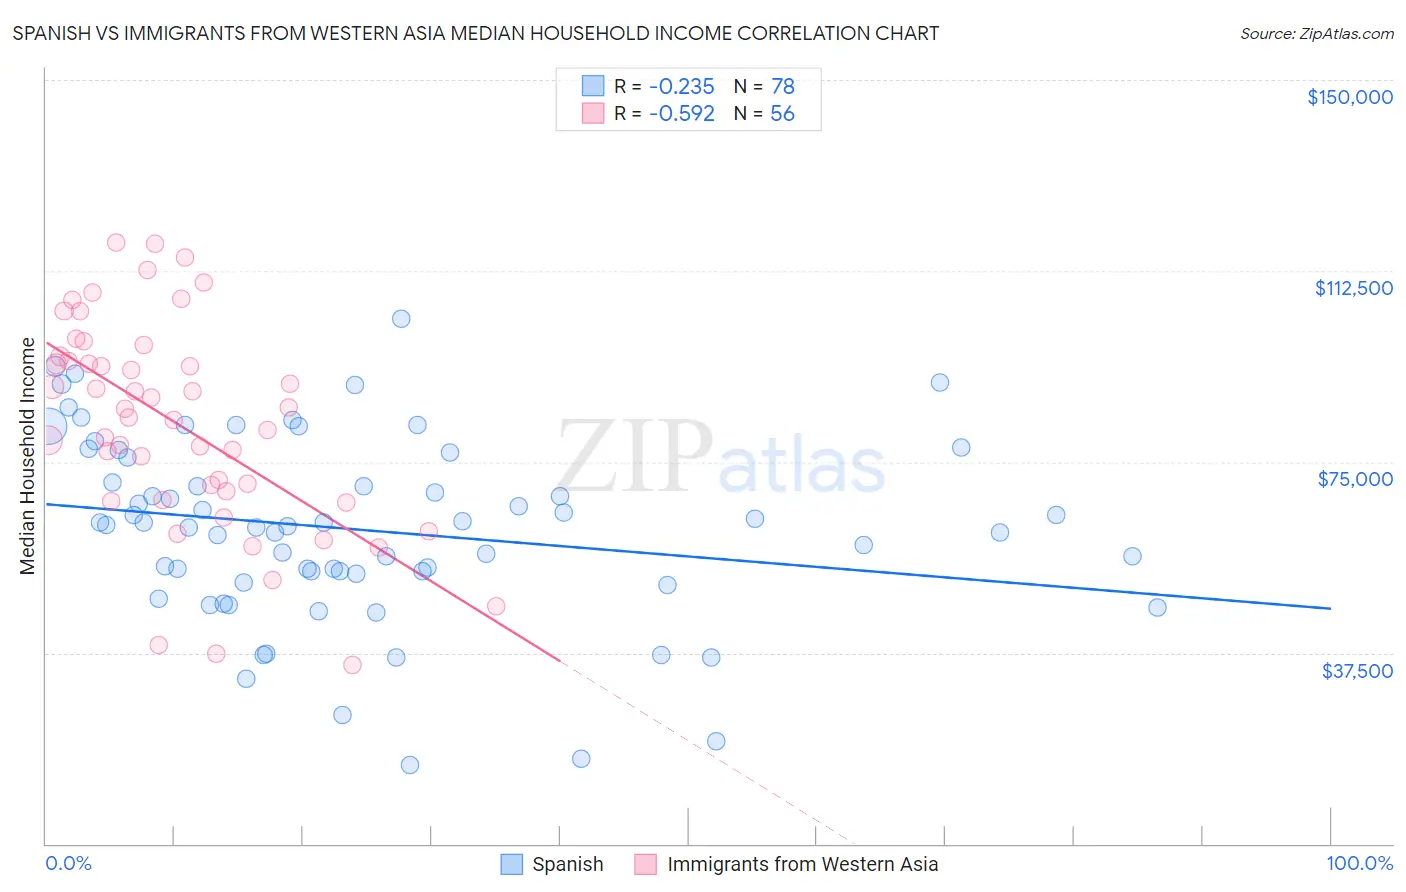 Spanish vs Immigrants from Western Asia Median Household Income